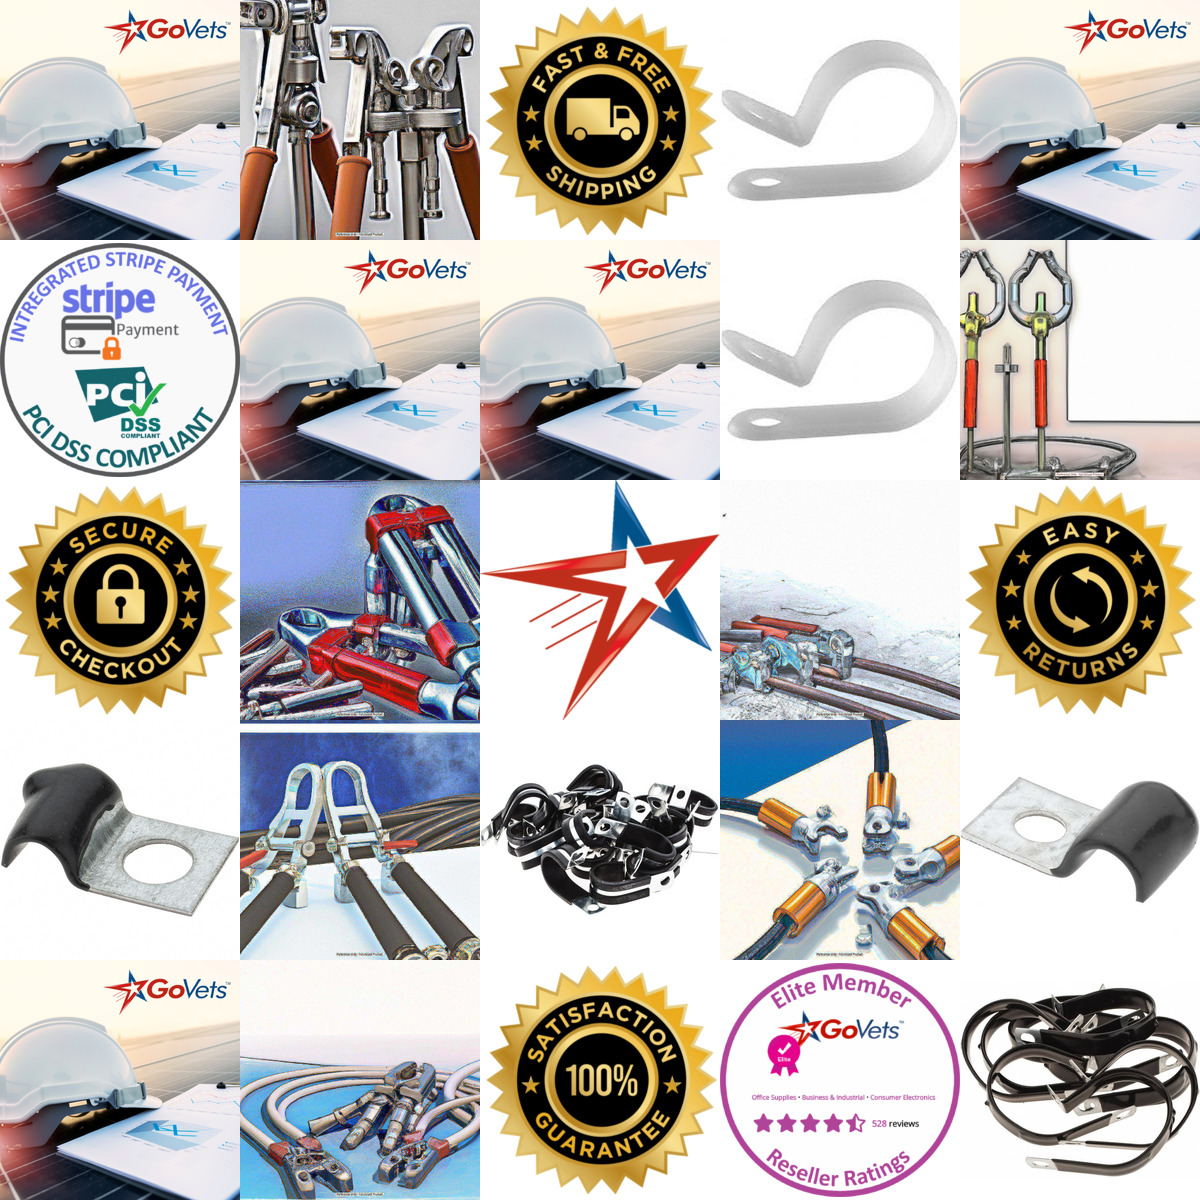 A selection of Cable Clamps and Holders products on GoVets